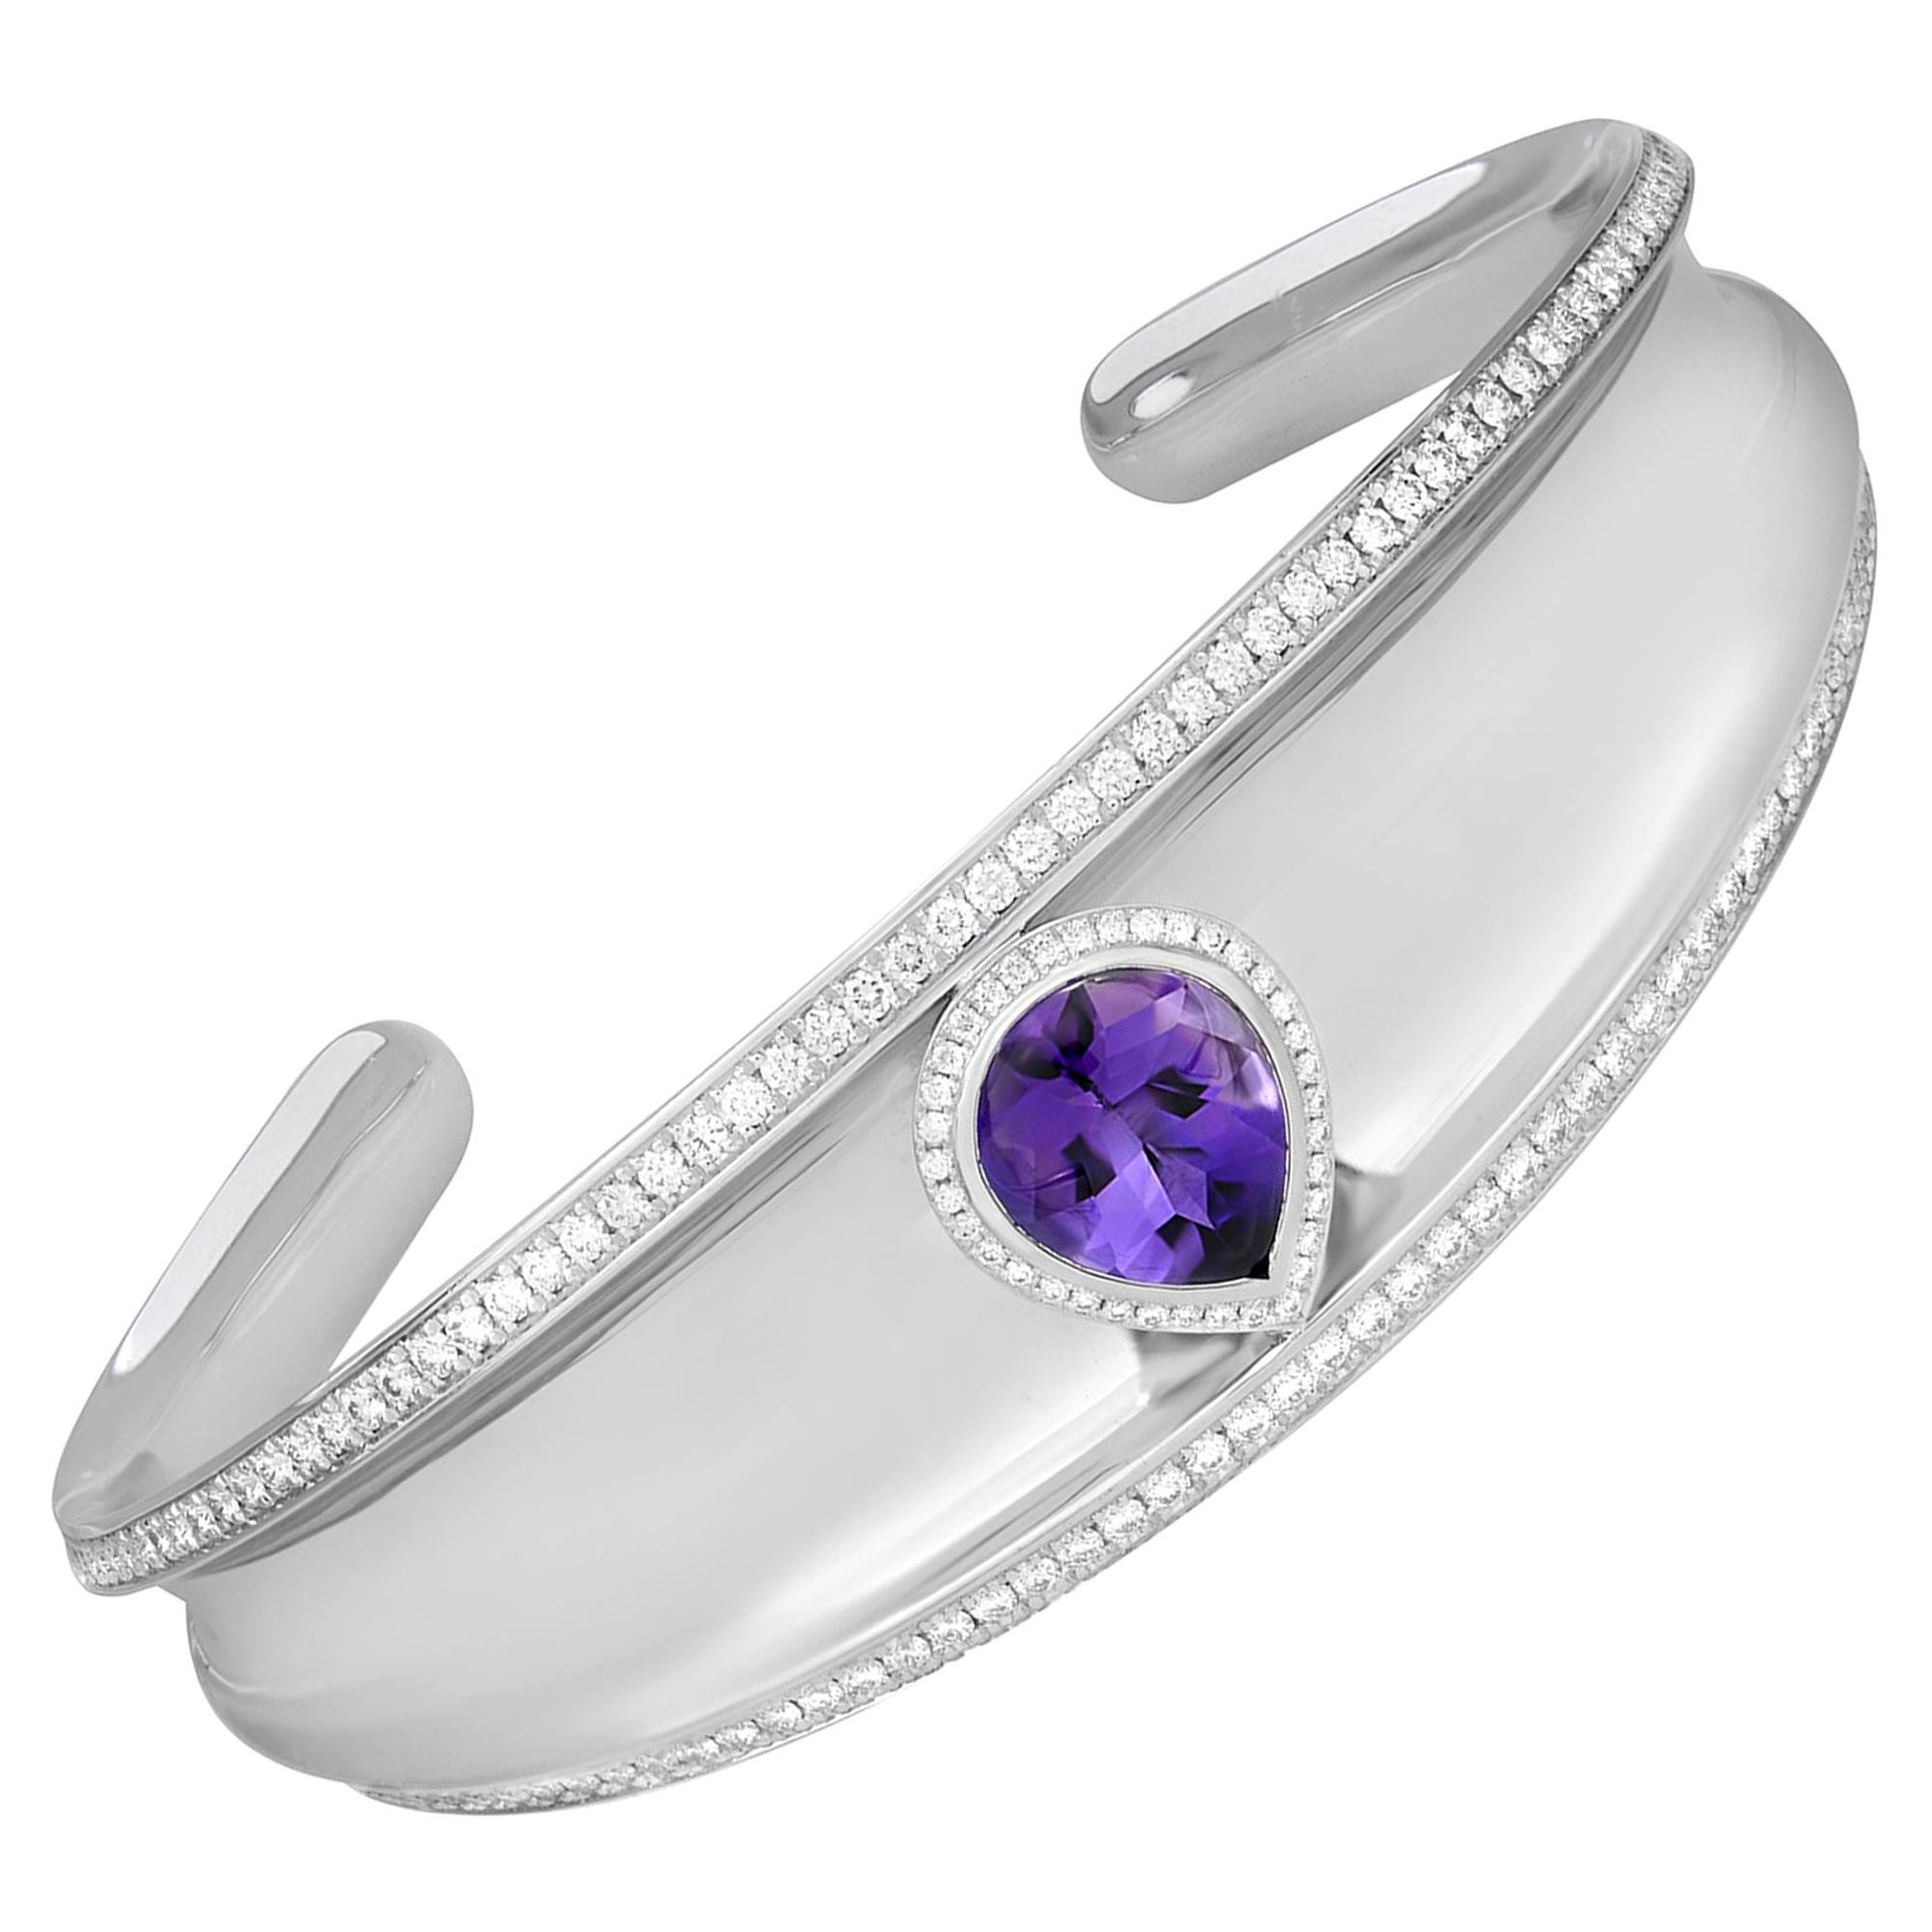 Chopard Imperiale Amethyst and Diamonds Cuff Bracelet 18k White Gold 2.38cttw For Sale